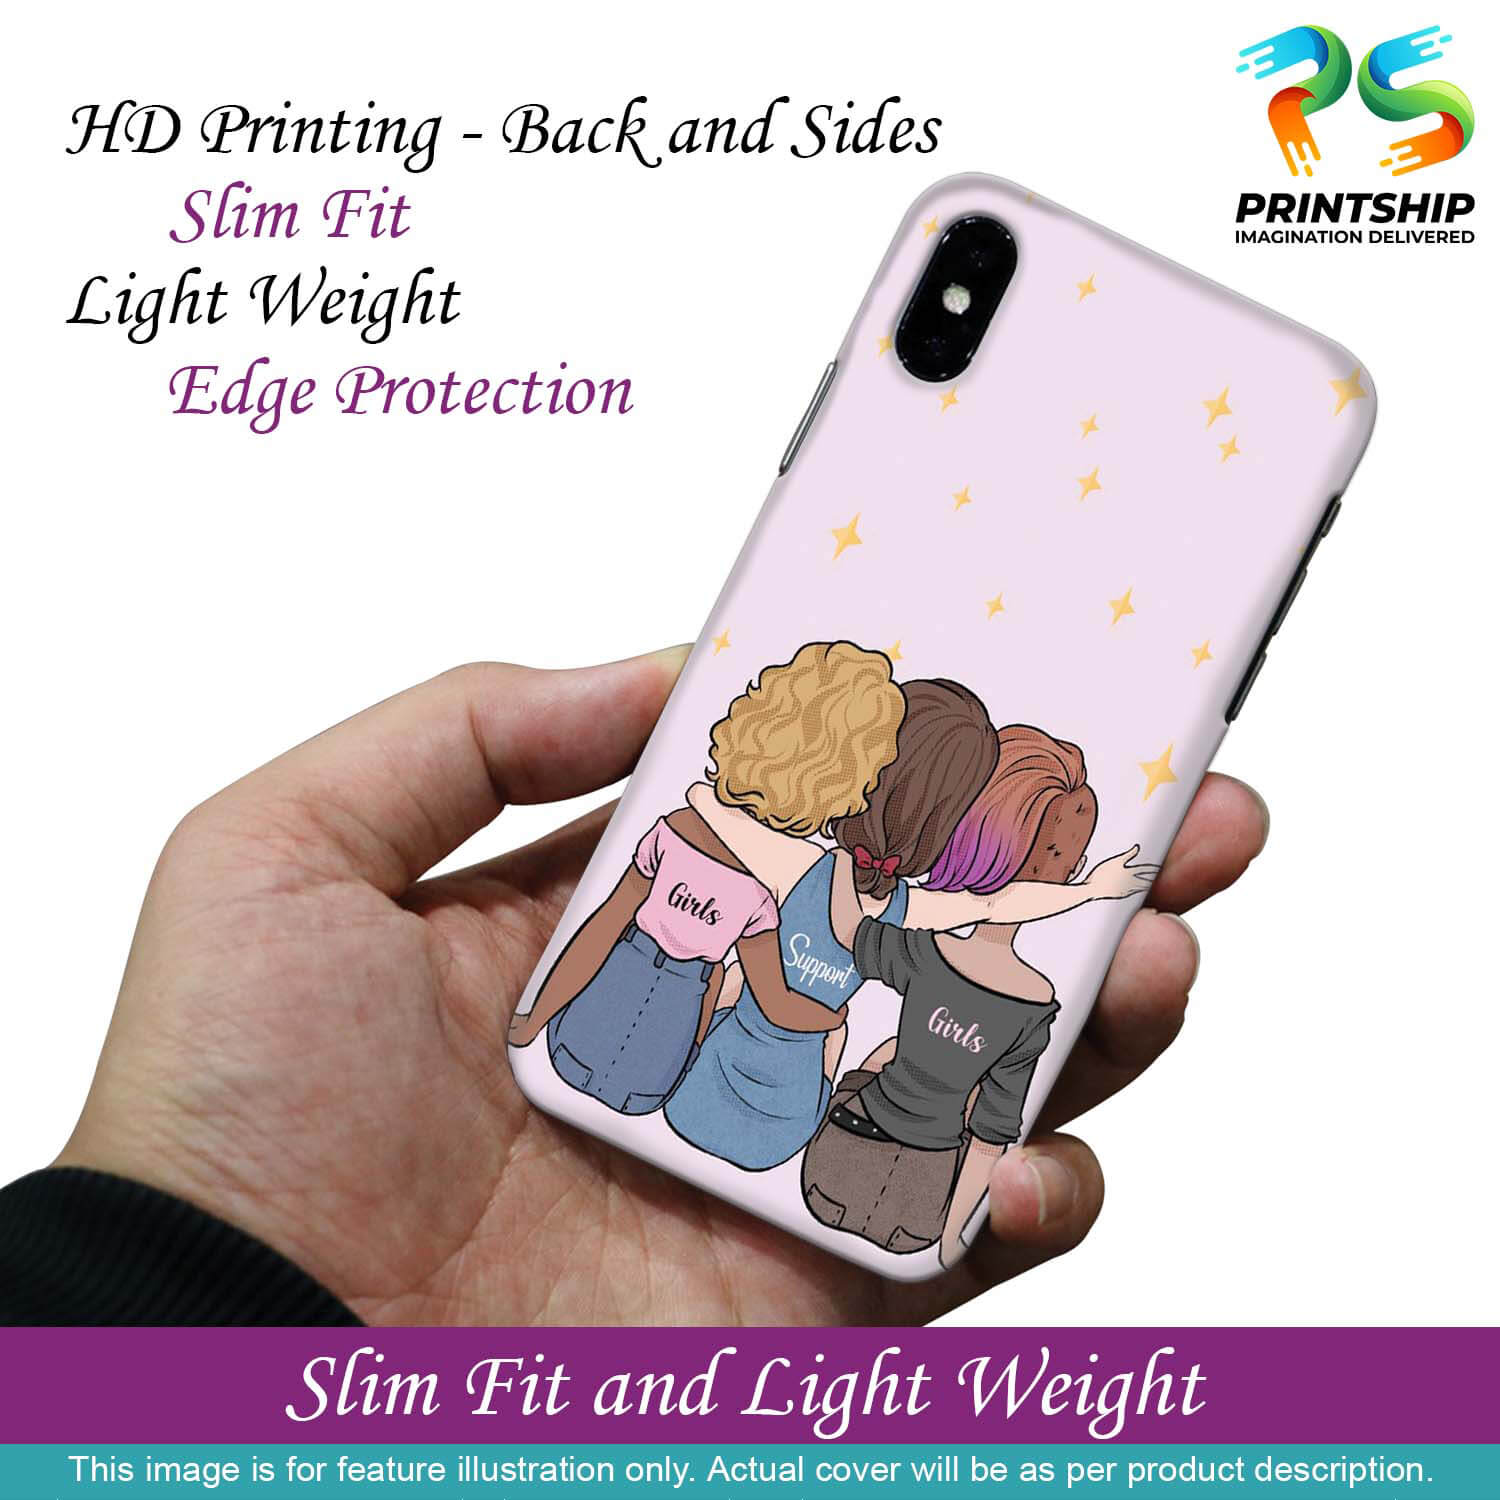 PS1313-Girls Support Girls Back Cover for Samsung Galaxy A70